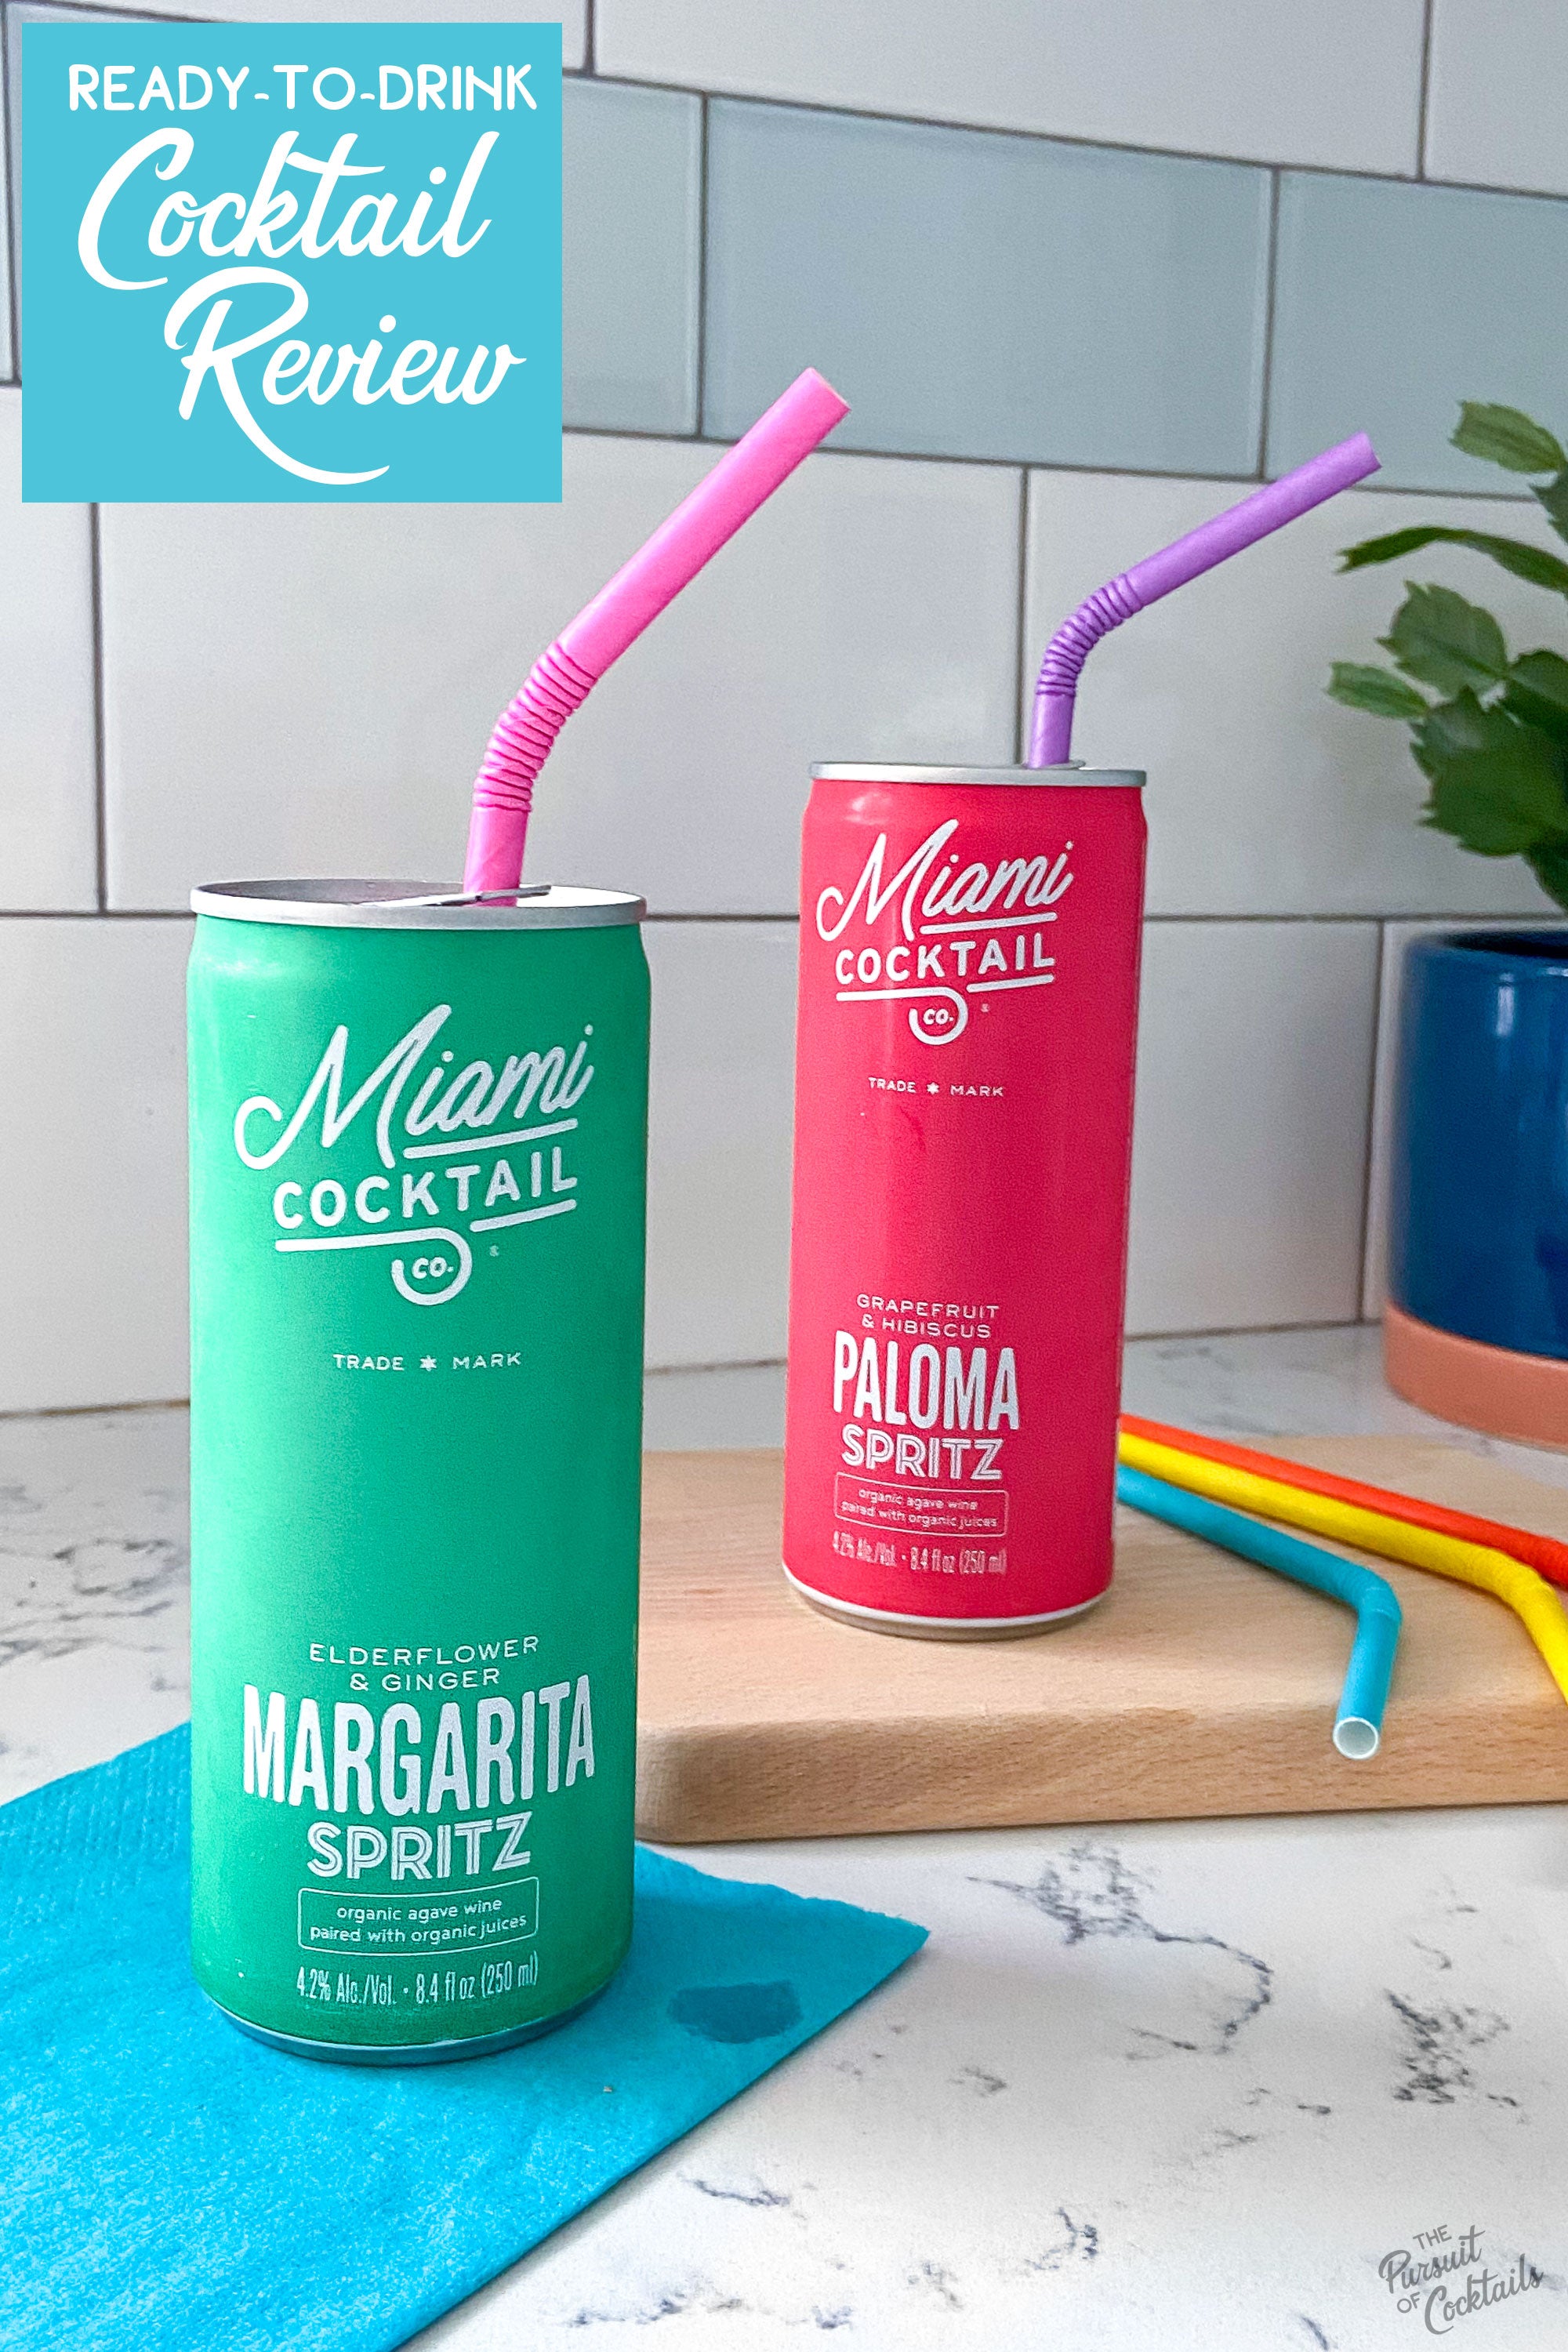 Miami Cocktail Co canned cocktail review of their Paloma and Margarita by The Pursuit of Cocktails